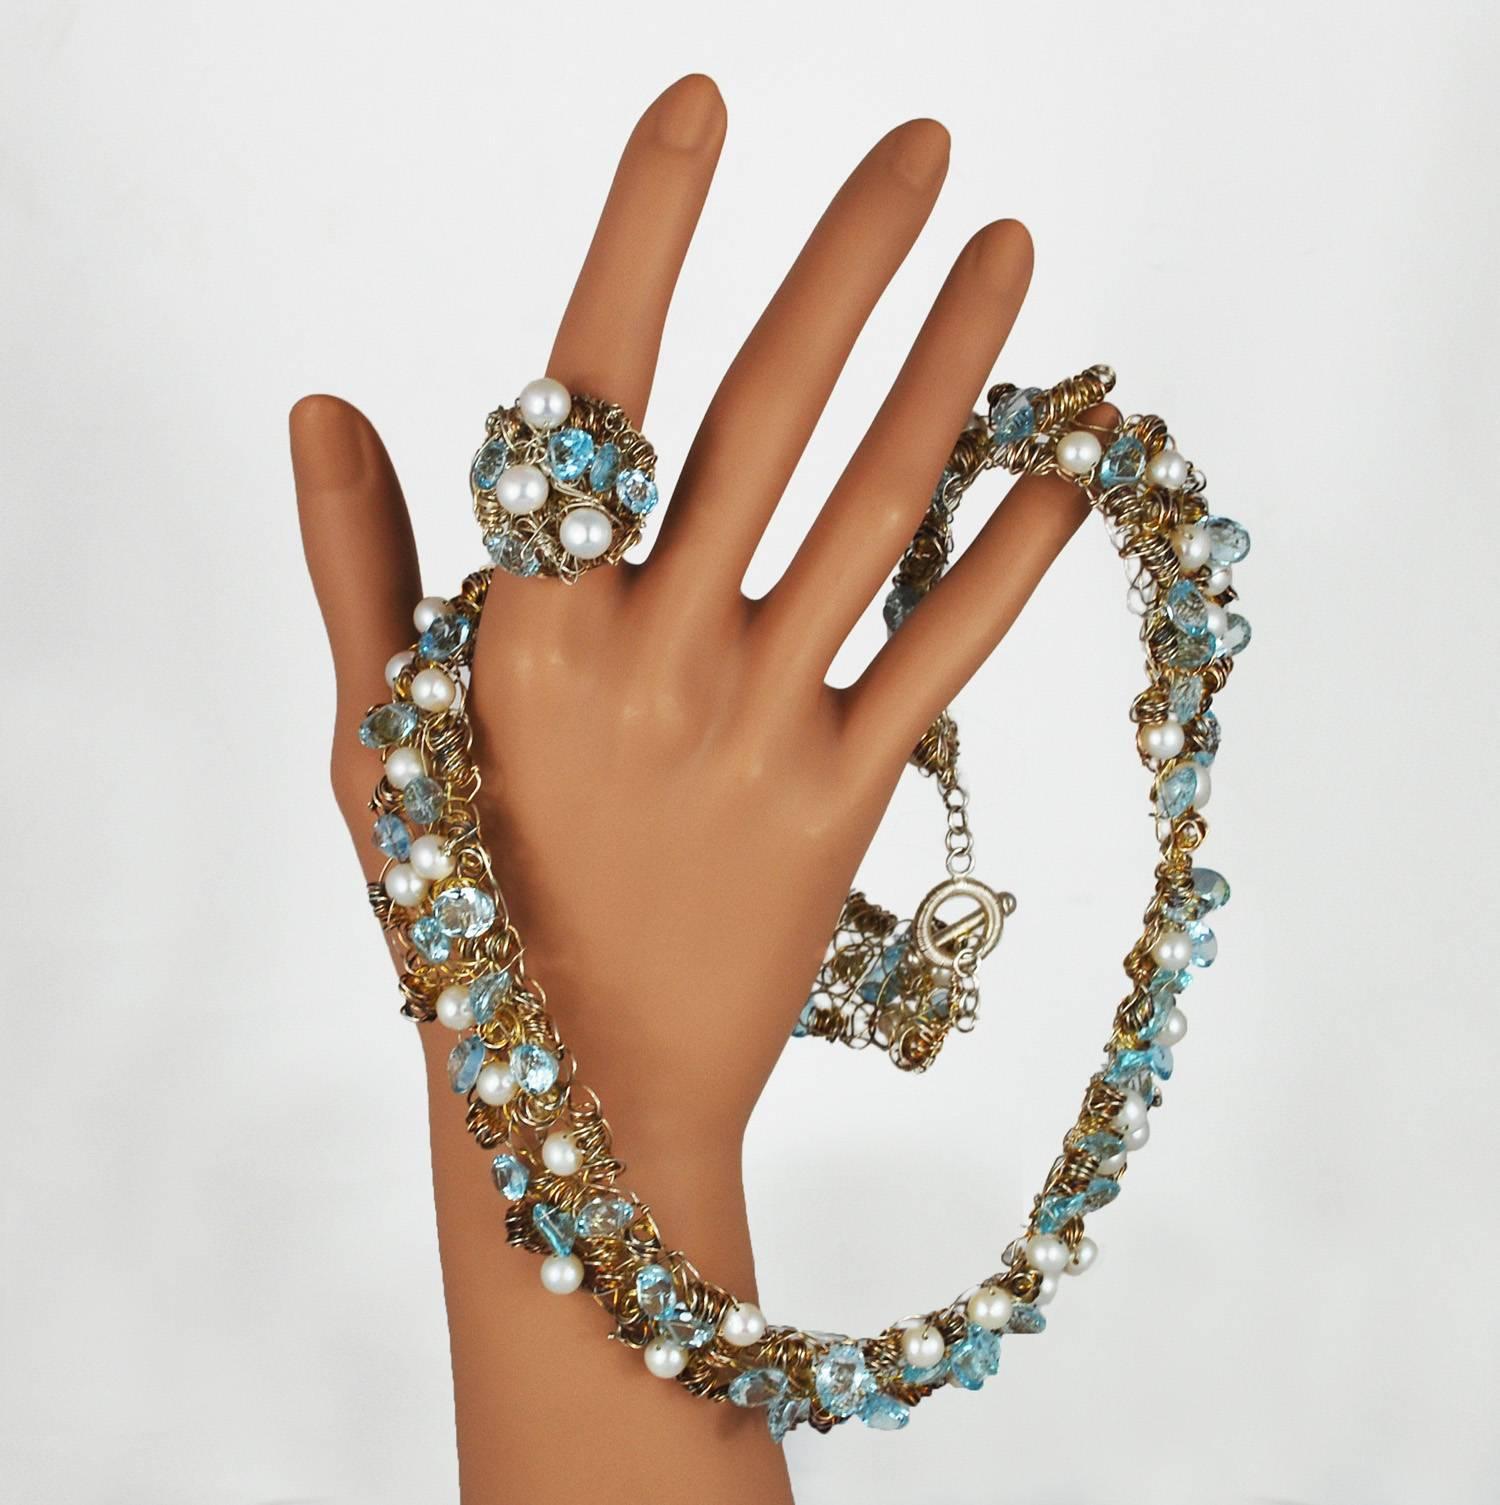 A bright aquamarine pearl necklace and ring set  from American jewelry designer Nikki Fledbaum, or Sedacca. A total of 53 pearls and 69 cut aquamarine stones are strung on rhodium wire and set amongst tightly wound whimsical spirals, all hand made.